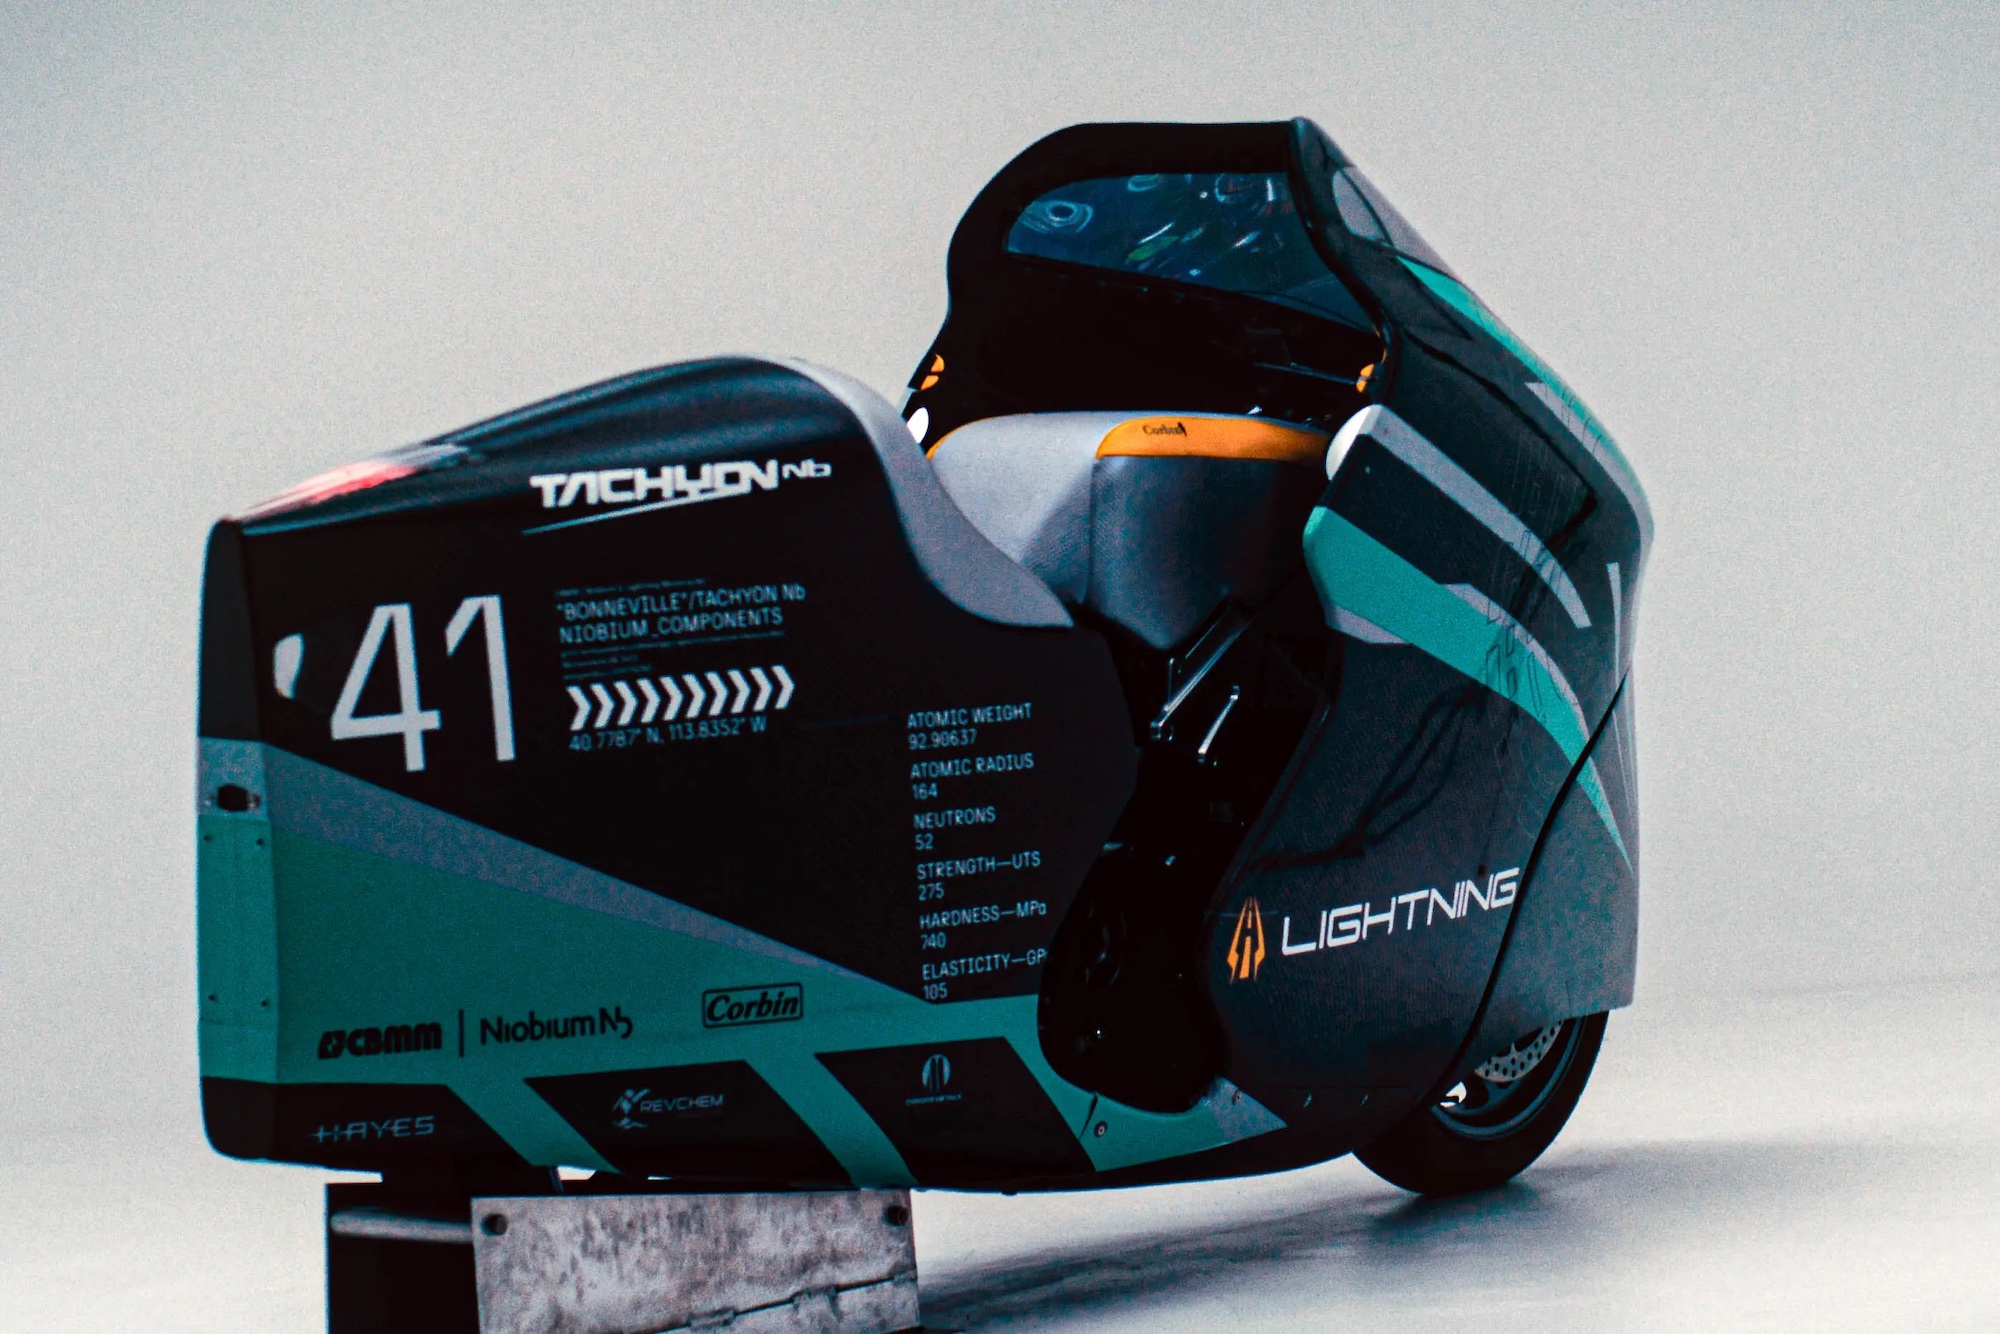 Lightning Motorycles' Tachyon nb - a new contender for the electric land speed record. Media sourced from New Atlas.